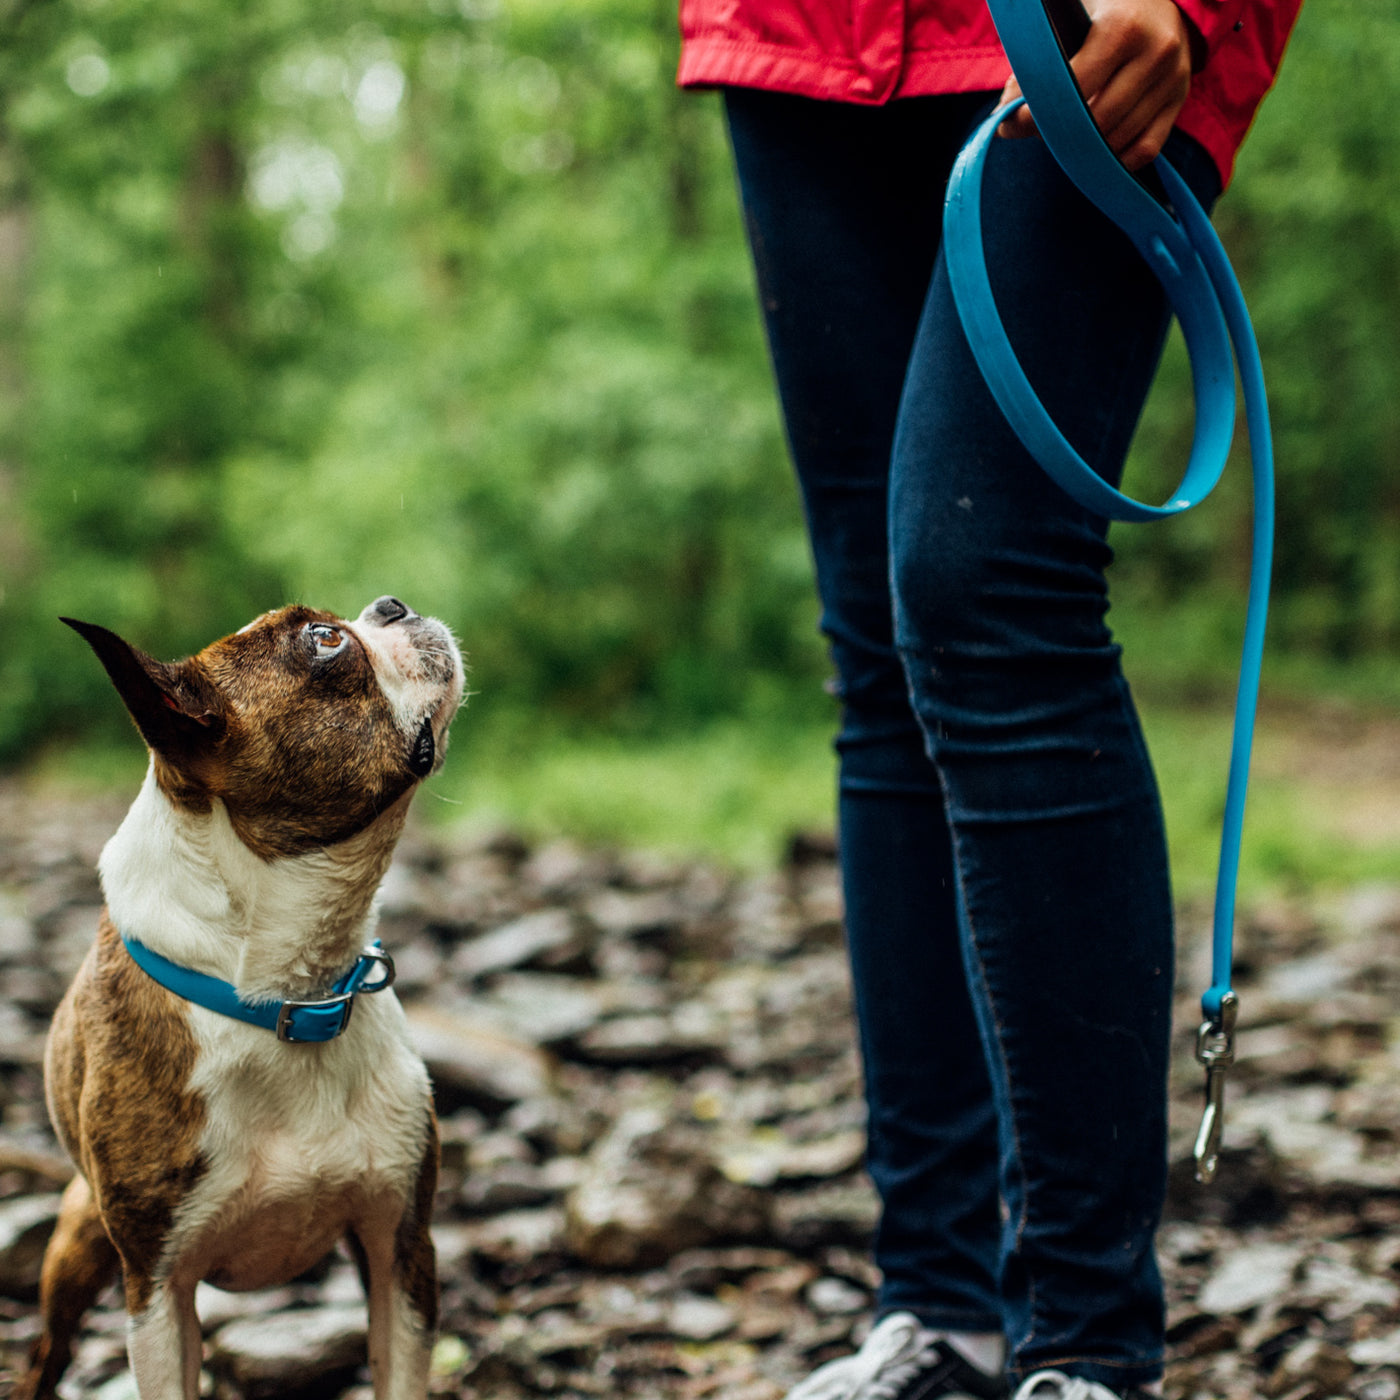 French bulldog looking at woman holding blue dog leash